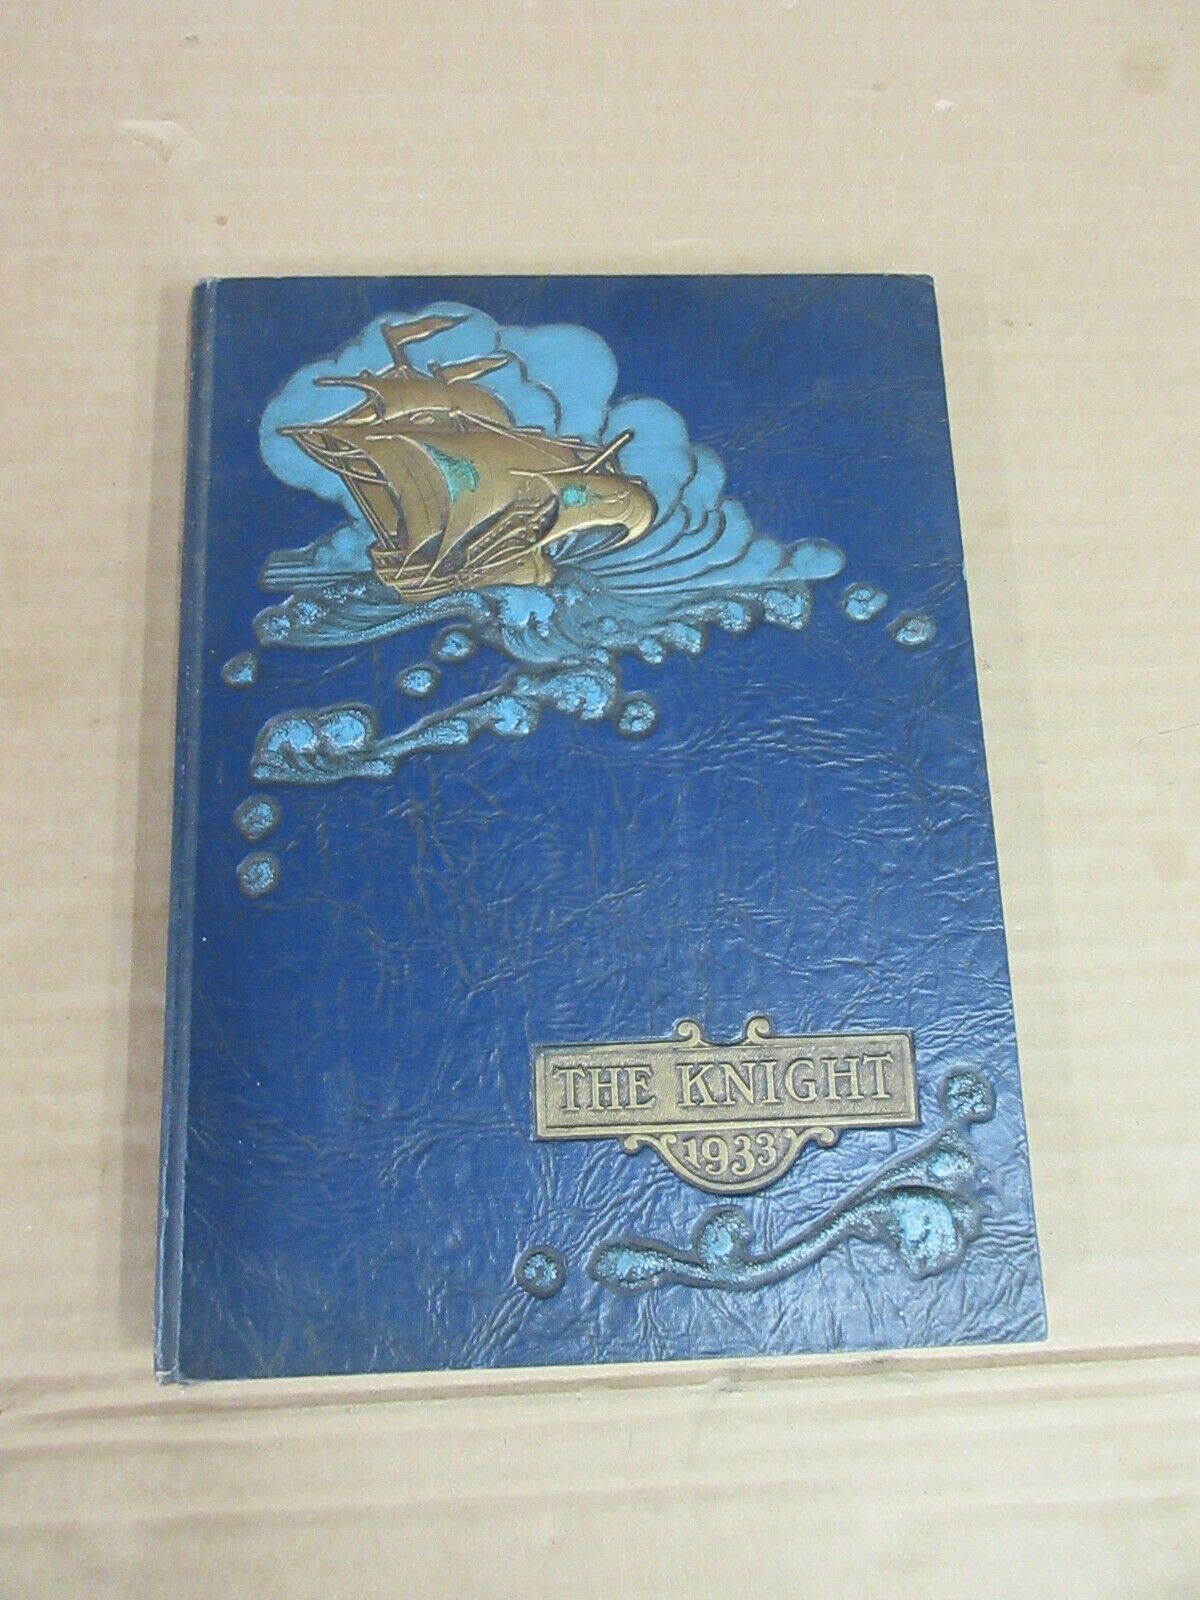 Vintage The Knight 1933 Yearbook Collingswood High School Collingswood NJ